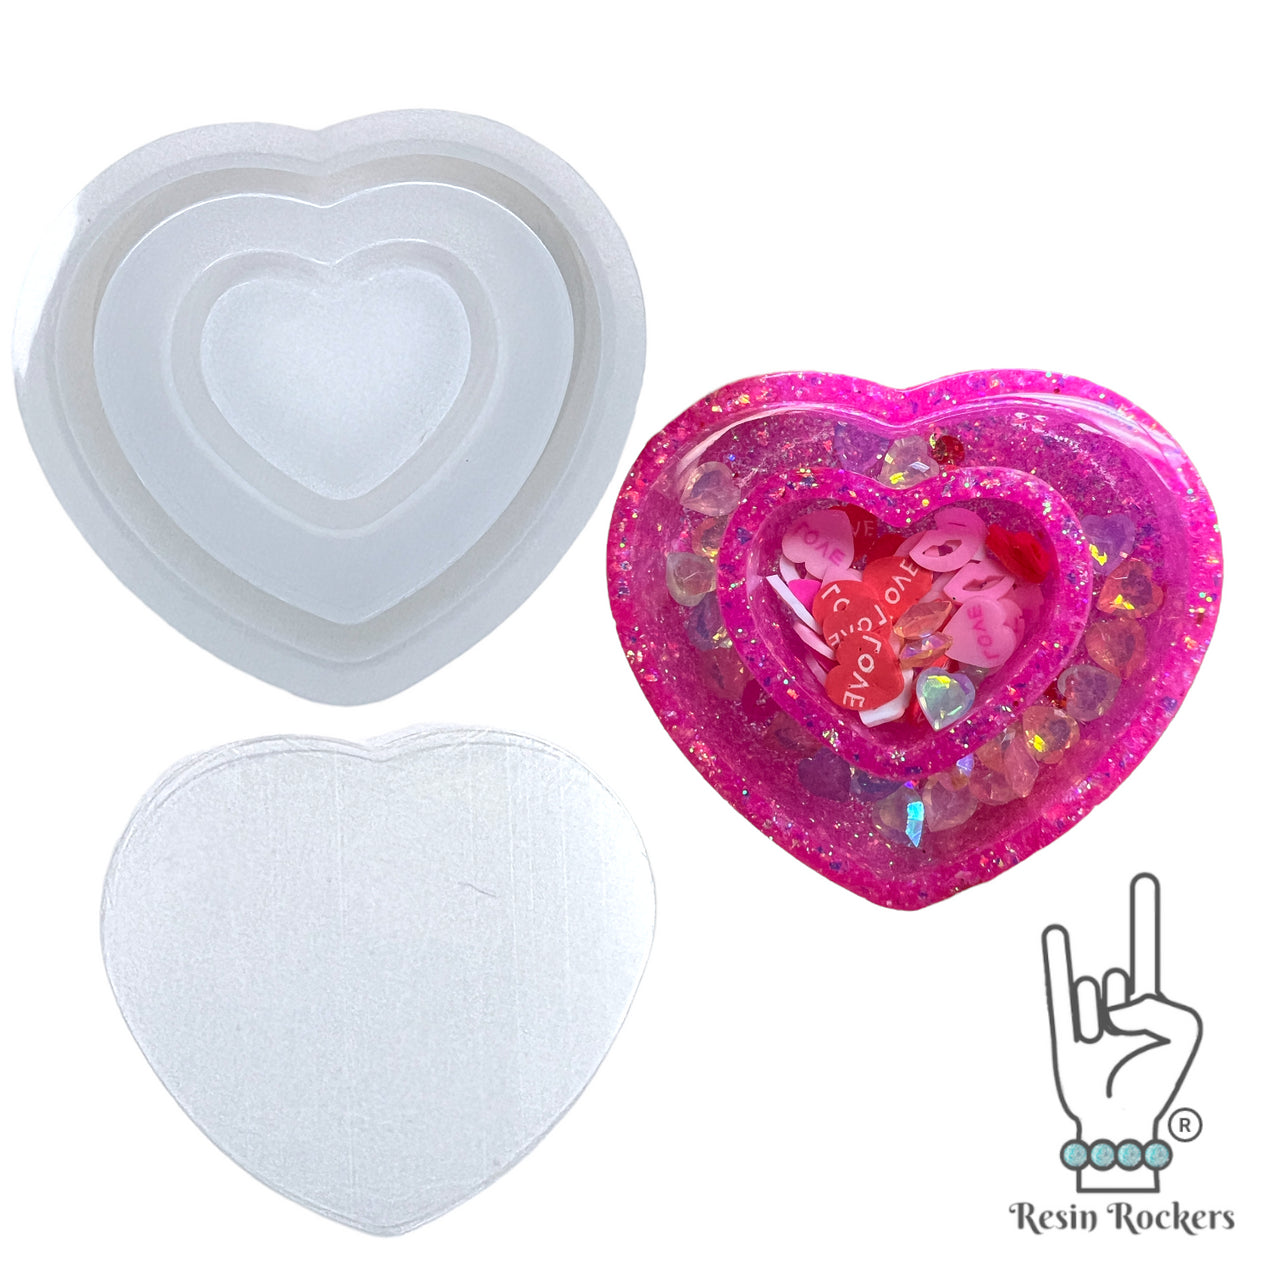 UV Safe Double Heart Shaker Silicone Mold with Fitted Shaker Film for UV and Epoxy Resin Art